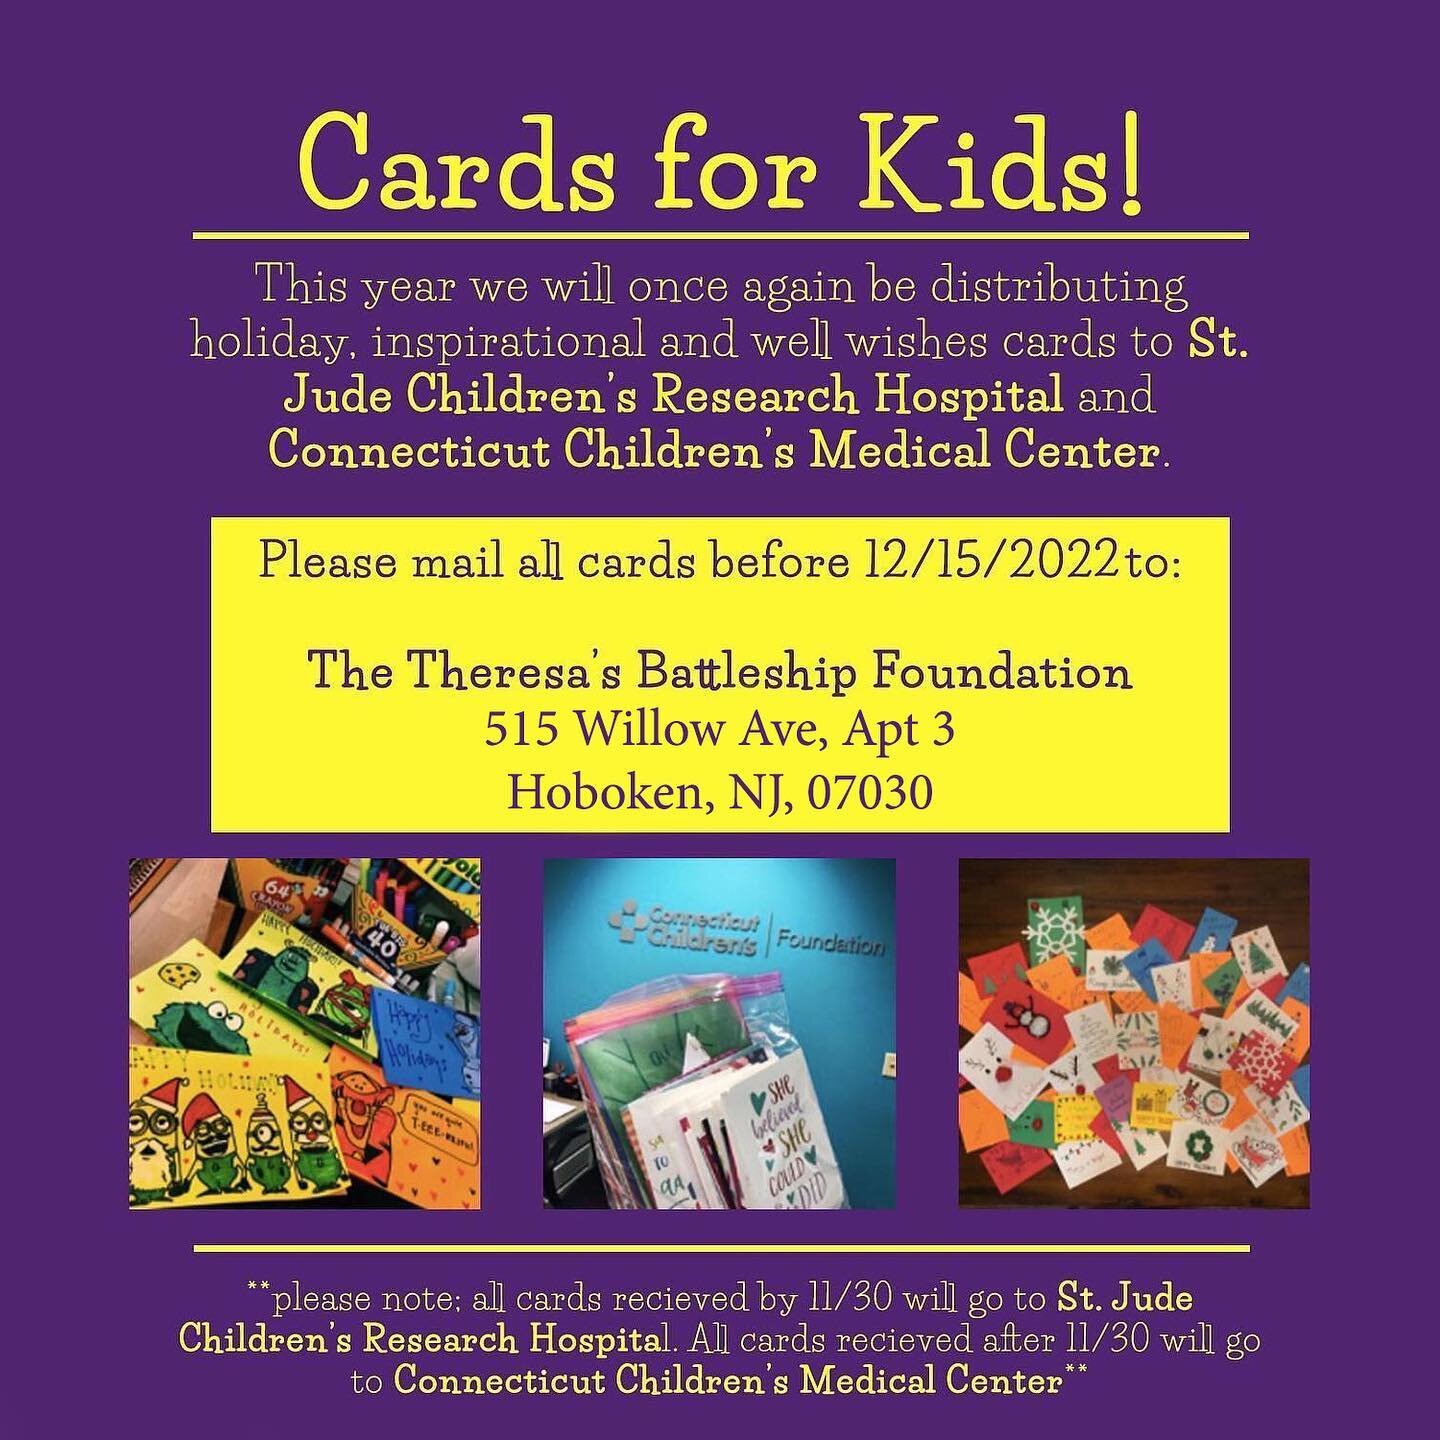 This year we are once again, collecting cards to give to pediatric cancer patients being treated at @stjude and @connecticutchildrens 💜💌 

Please send all cards by 12/15 to ensure they get to us in time to be delivered!!!

Drop off locations are al